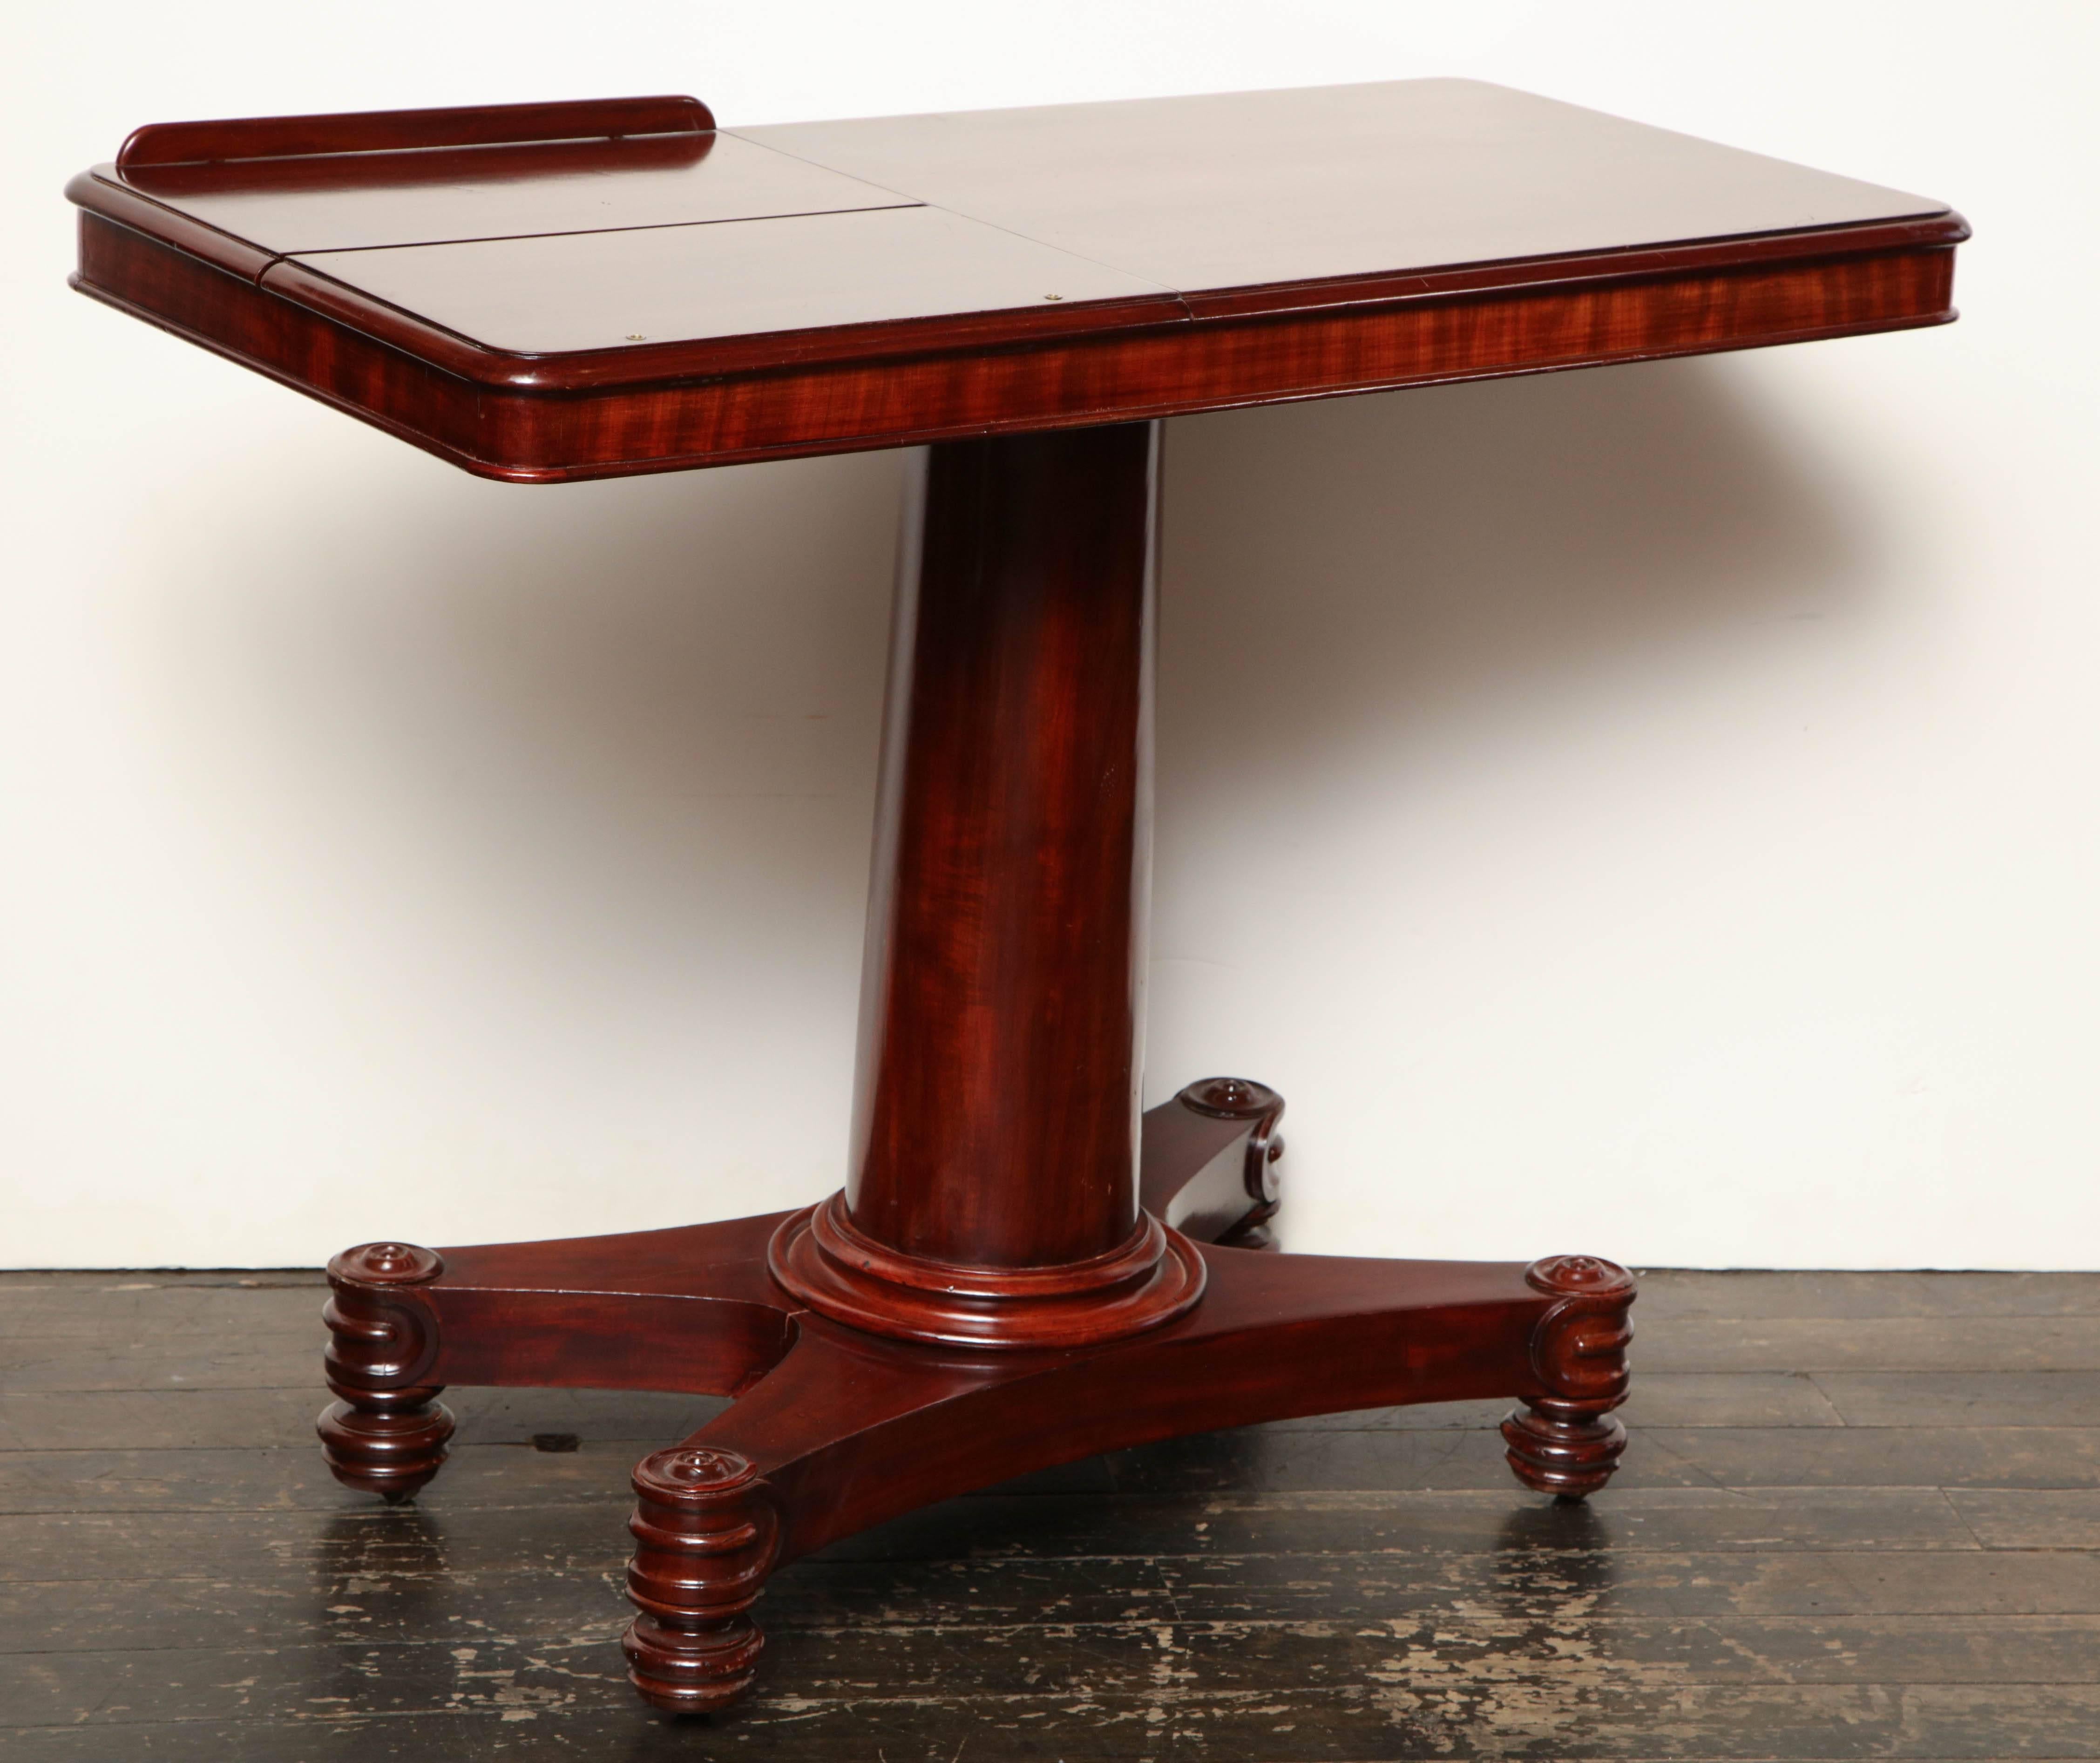 Early 19th century English adjustable bed table in mahogany.
It extends up to 11 inches from lowest position
and slides 8 inches to the left.